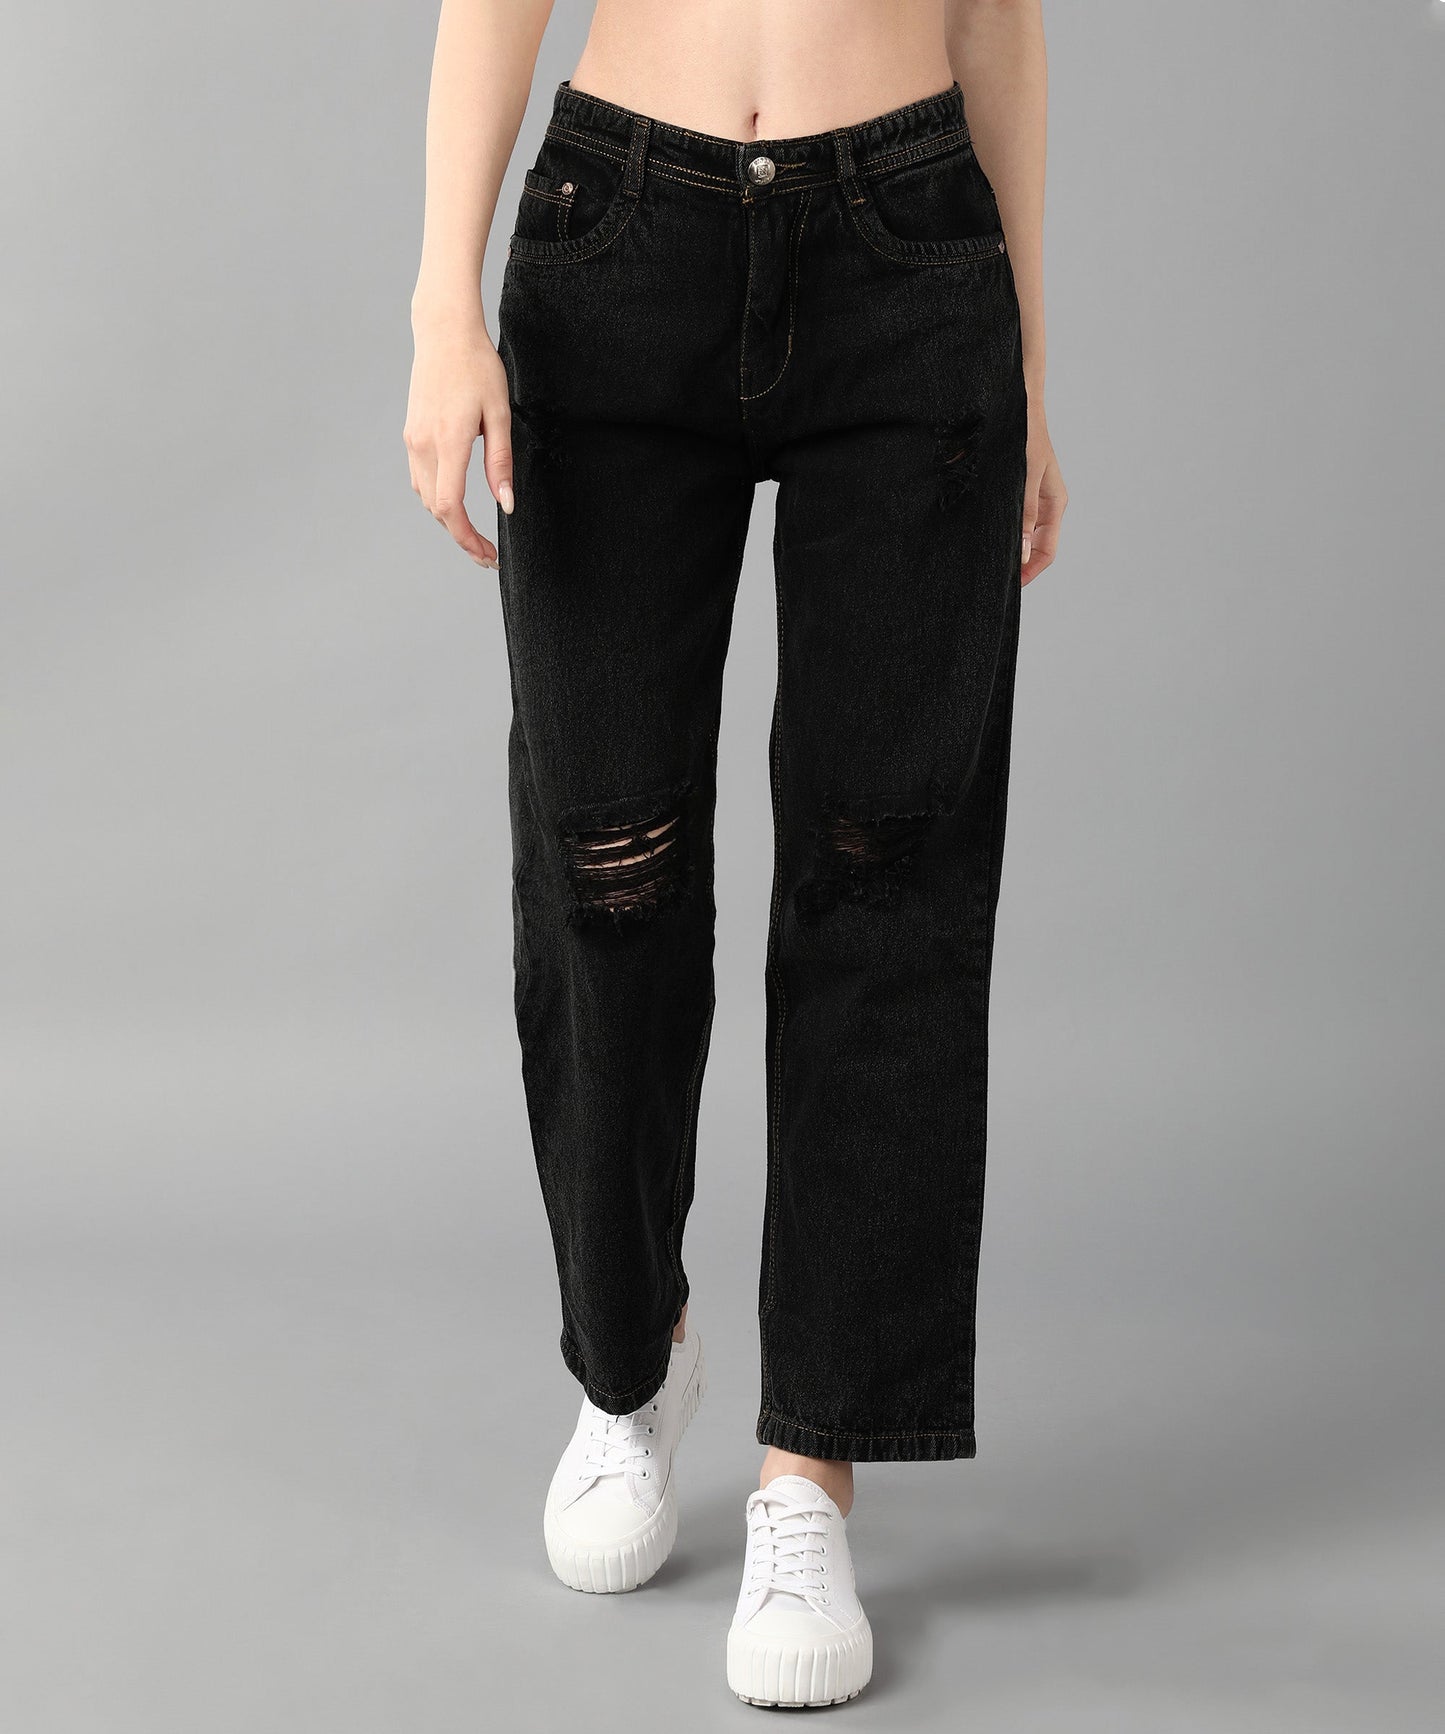 Relaxed Fit Distressed Black Jeans - NiftyJeans